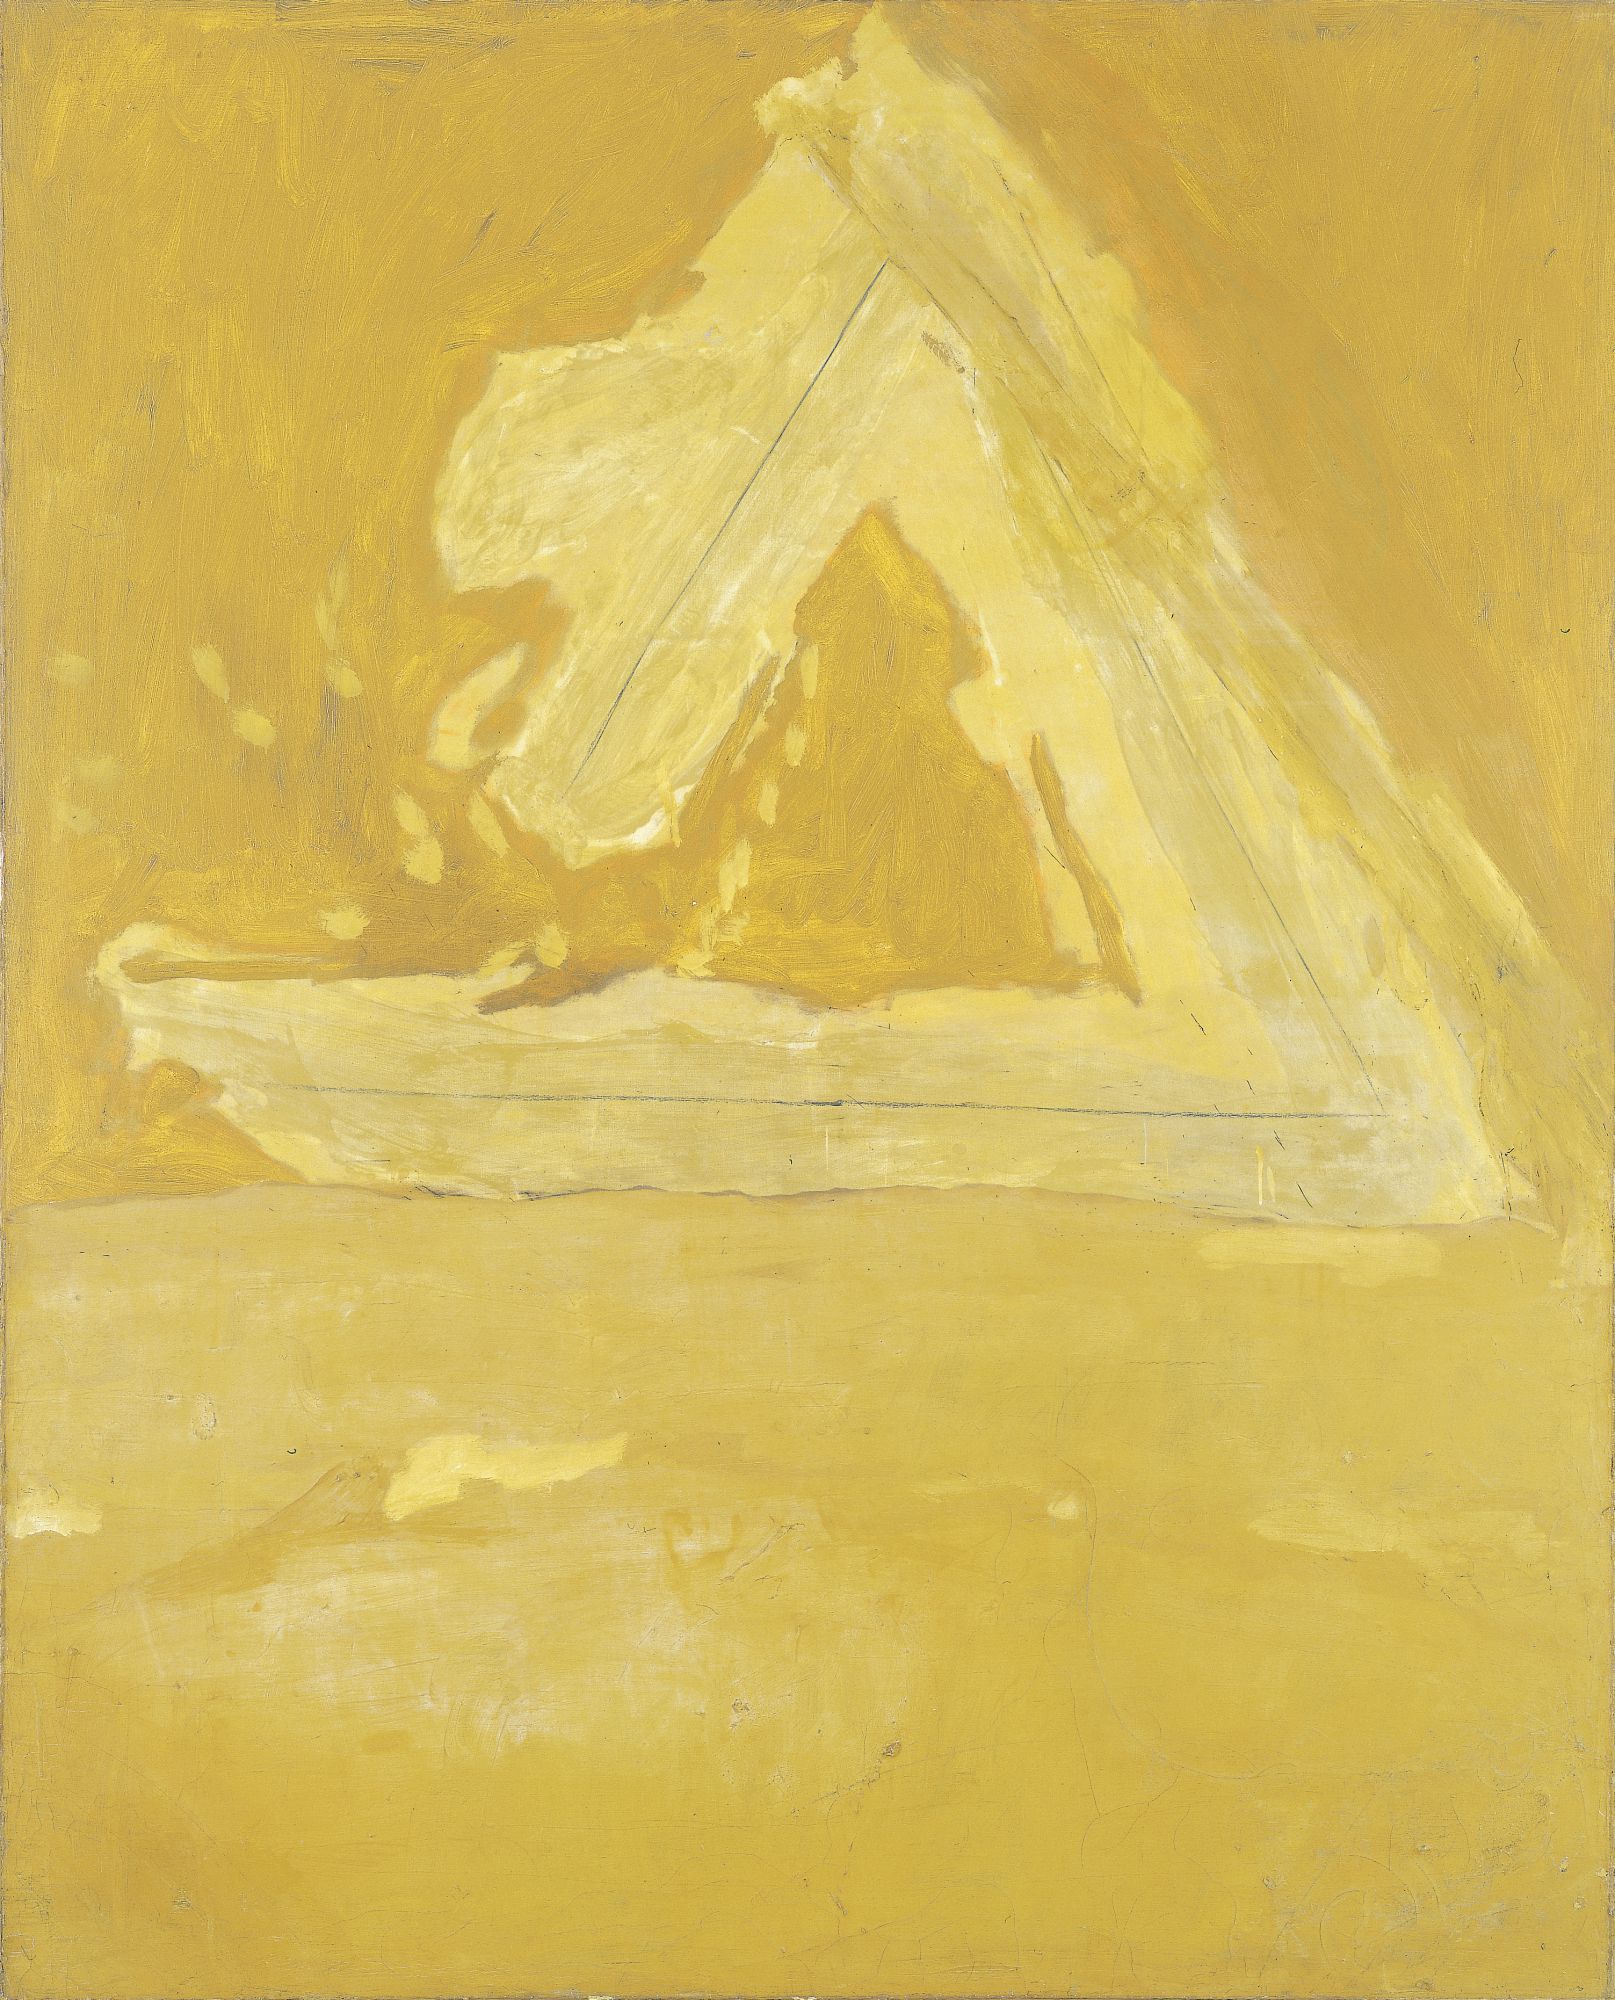 Summertime in Italy No. 7 (in Golden Ochre), 1964, oil and charcoal on canvas, 85 ✕ 69 in. (215.9 ✕ 175.3 cm)